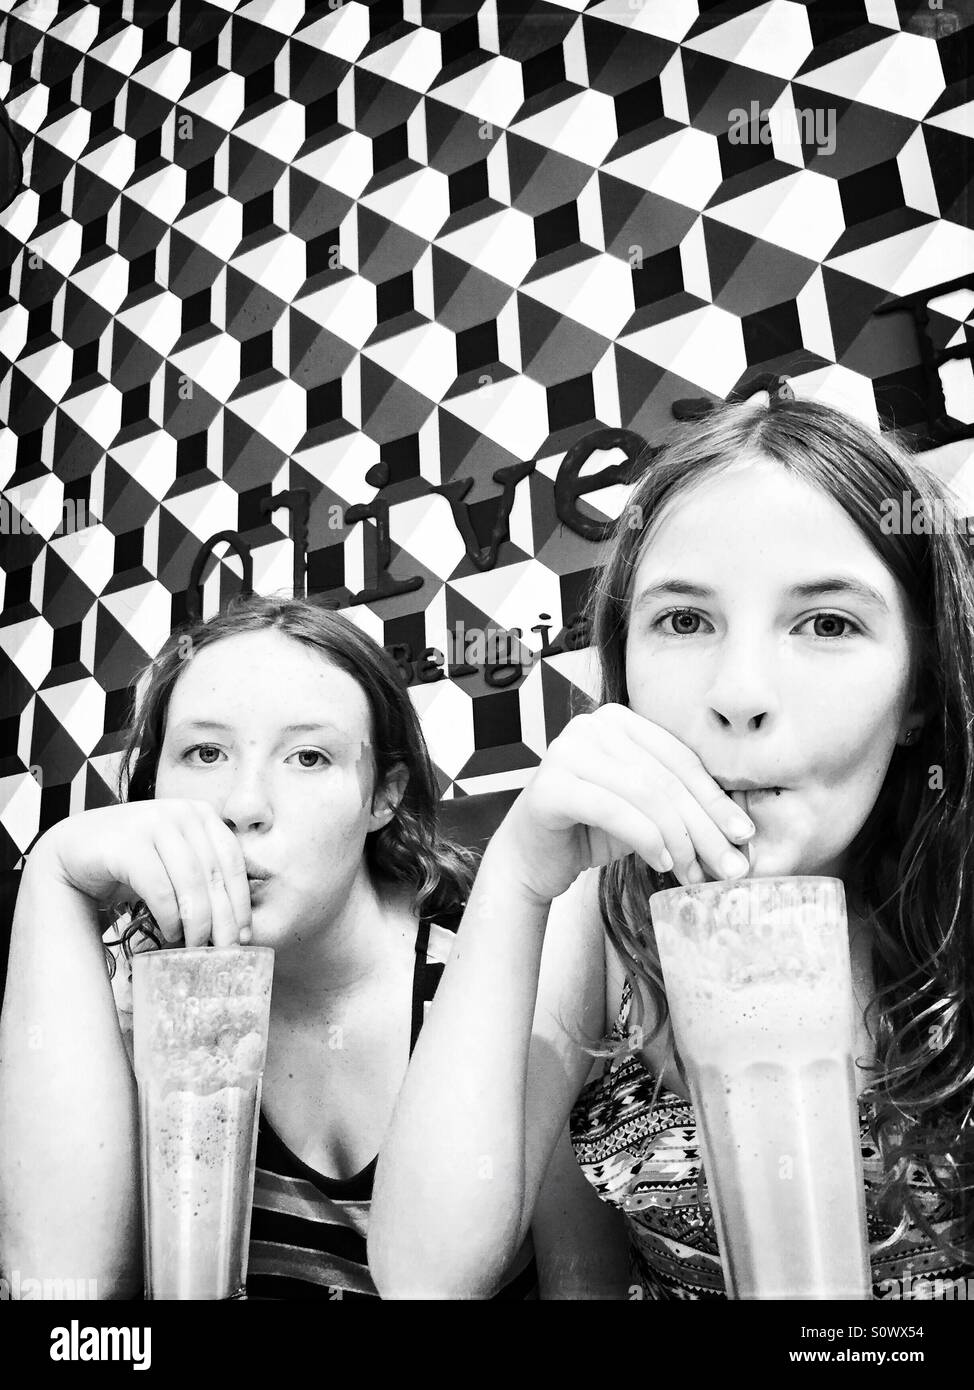 Two girls drinking milkshakes in cafe with geometric patterns on the wall - black and white Stock Photo